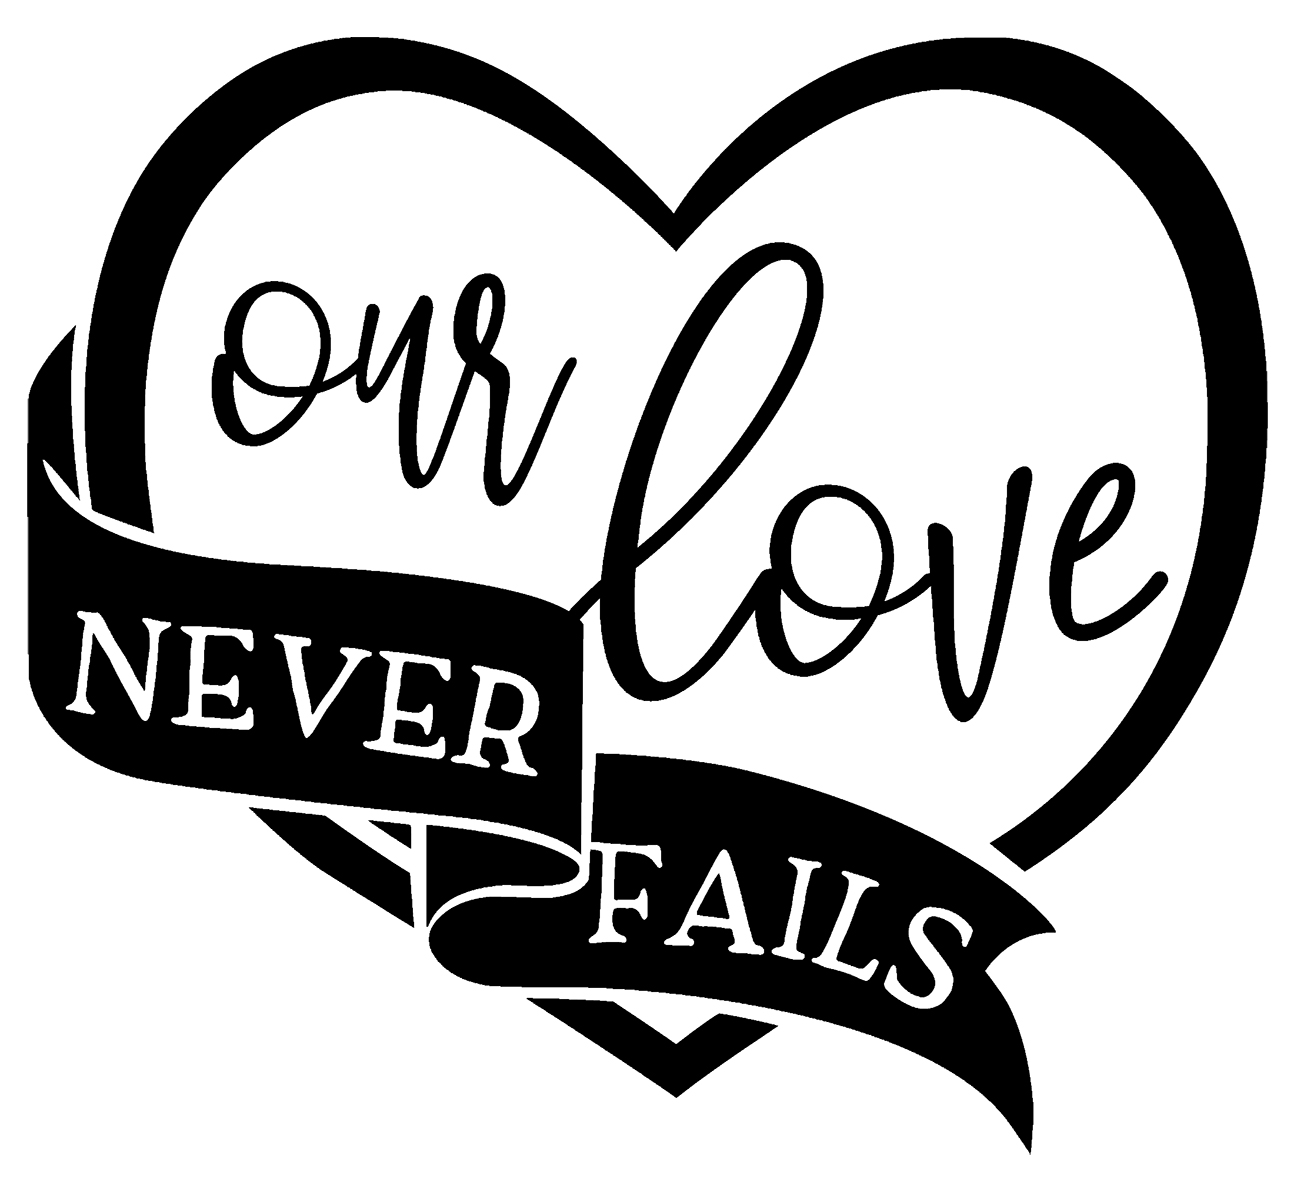 Our Love Never Fails Banner Heart Couple Relationship Marriage Wall Decals  for Walls Peel and Stick wall art murals Black Small 8 Inch 